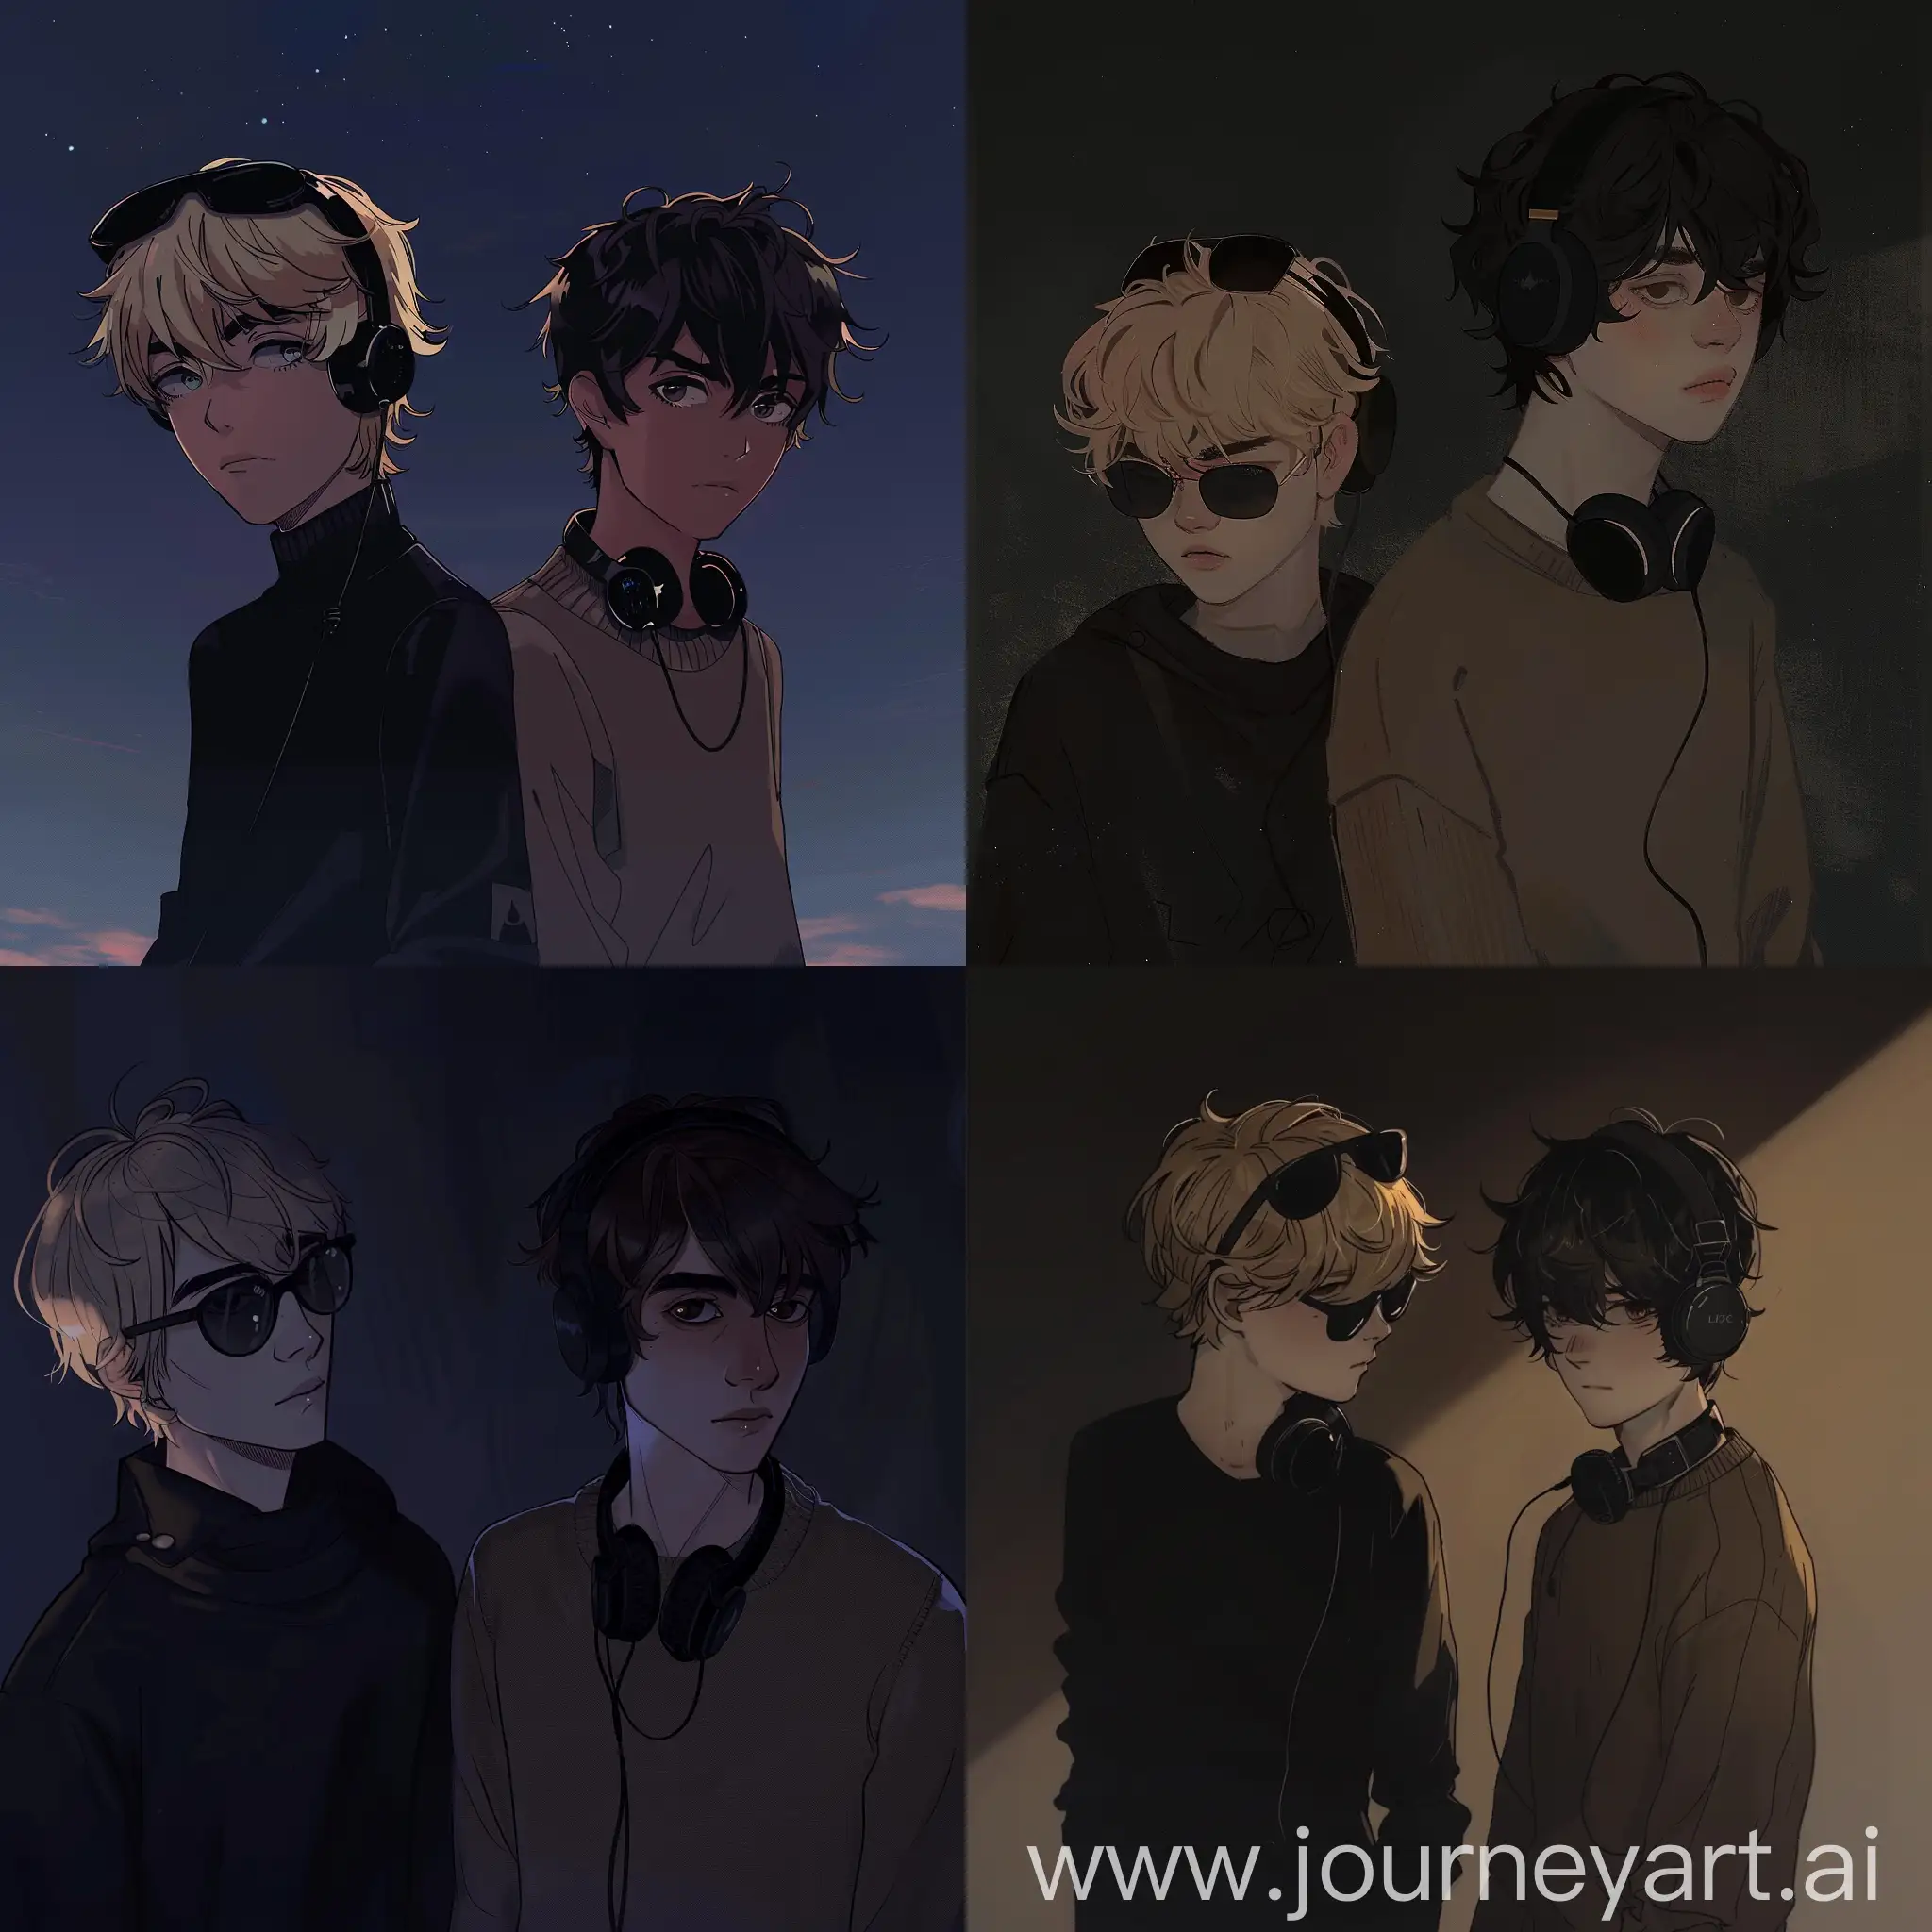 dark theme, night, animated drawing, teenagers, two teenage boys, the first one on the left is blonde with black outfit and having sunglasses on his forehead, the one on the right has dark brown hair wearing a sweater and having a headphones on his neck.